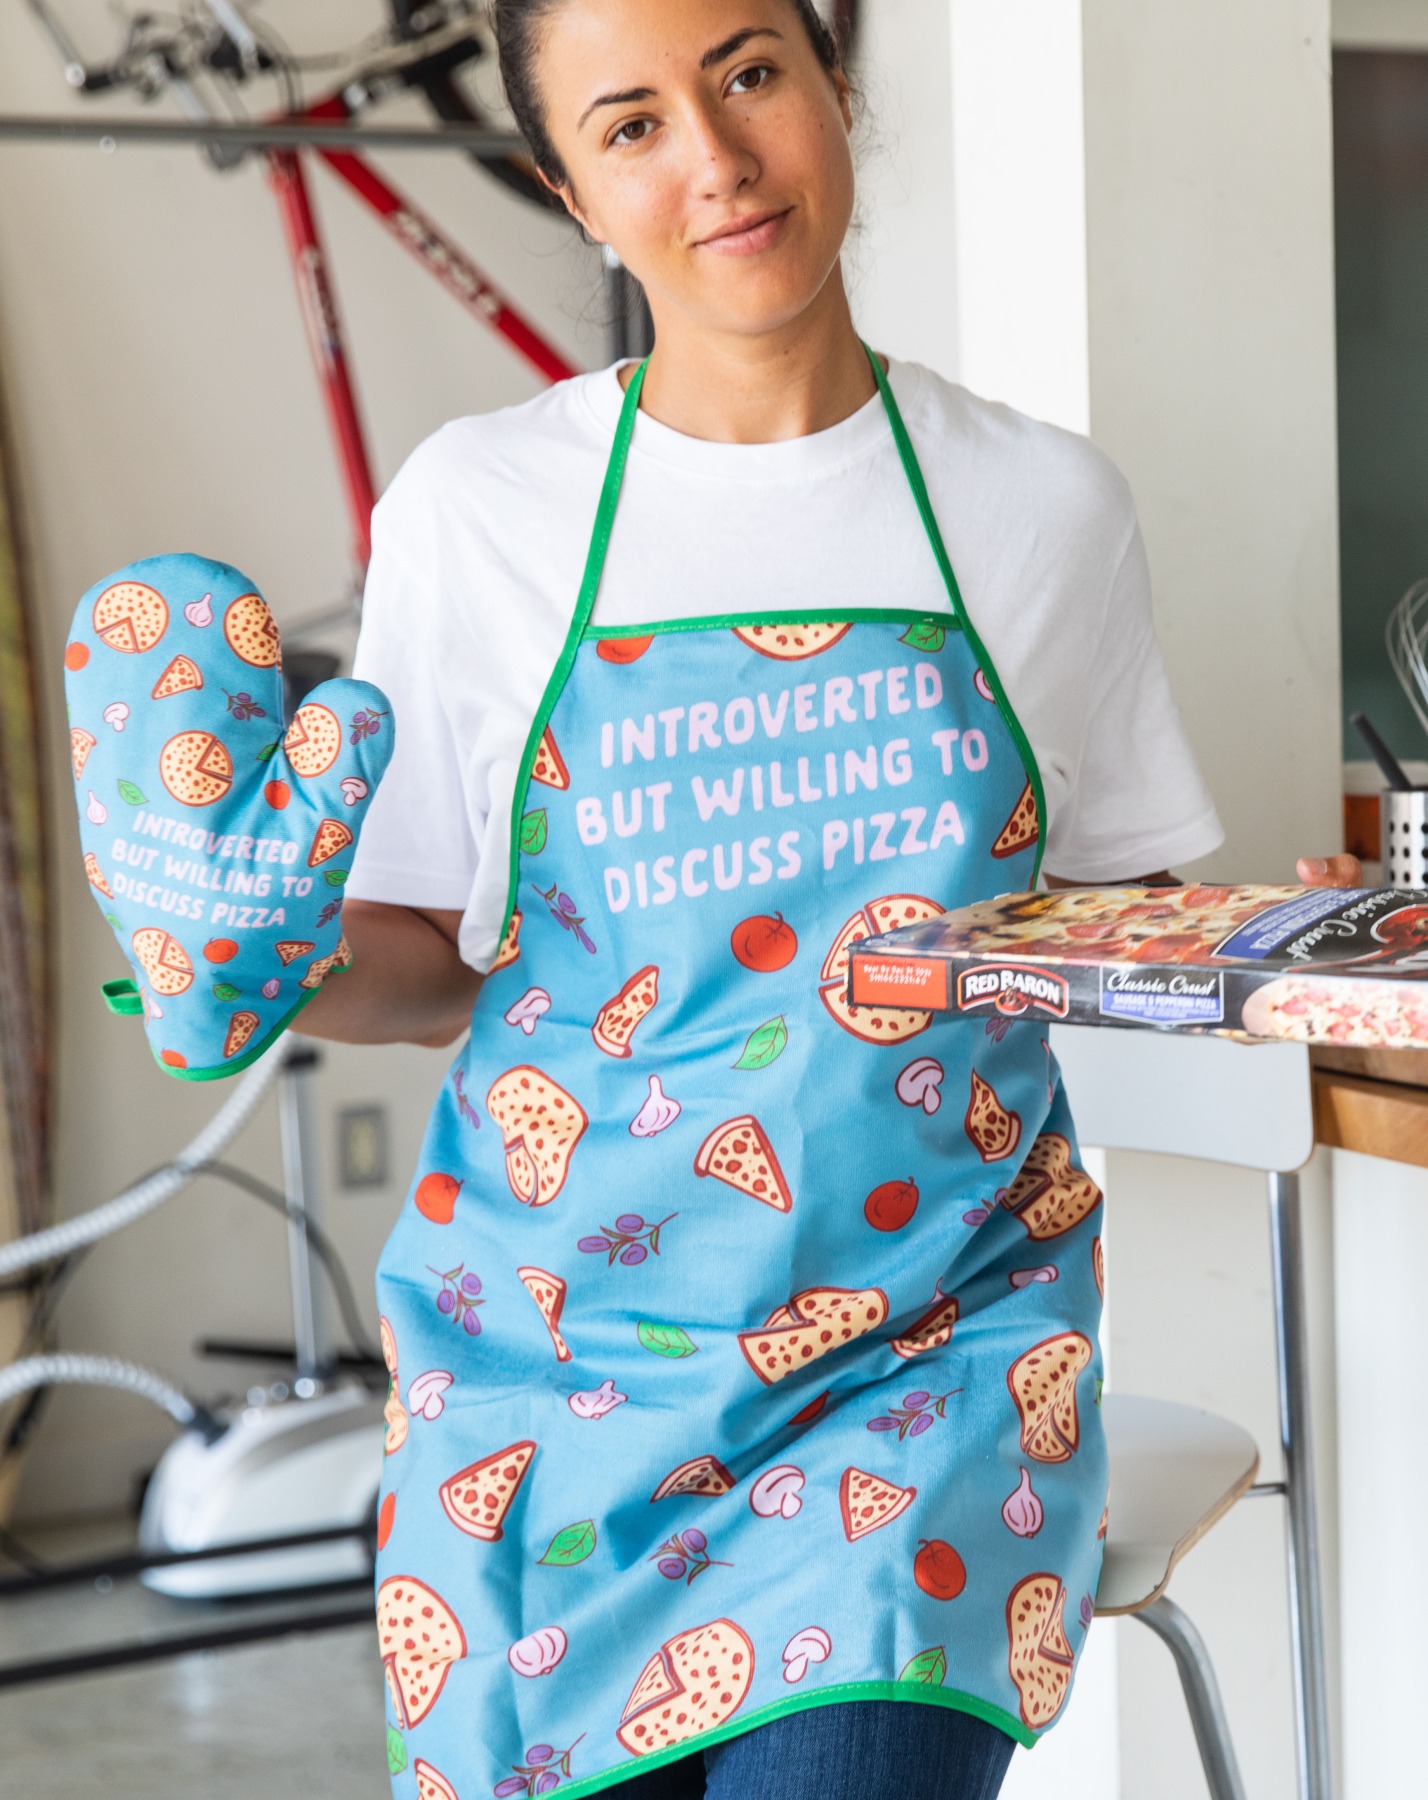 Introverted But Willing To Discuss Pizza Funny Baking Cooking Graphic Kitchen Accessories - image 3 of 8